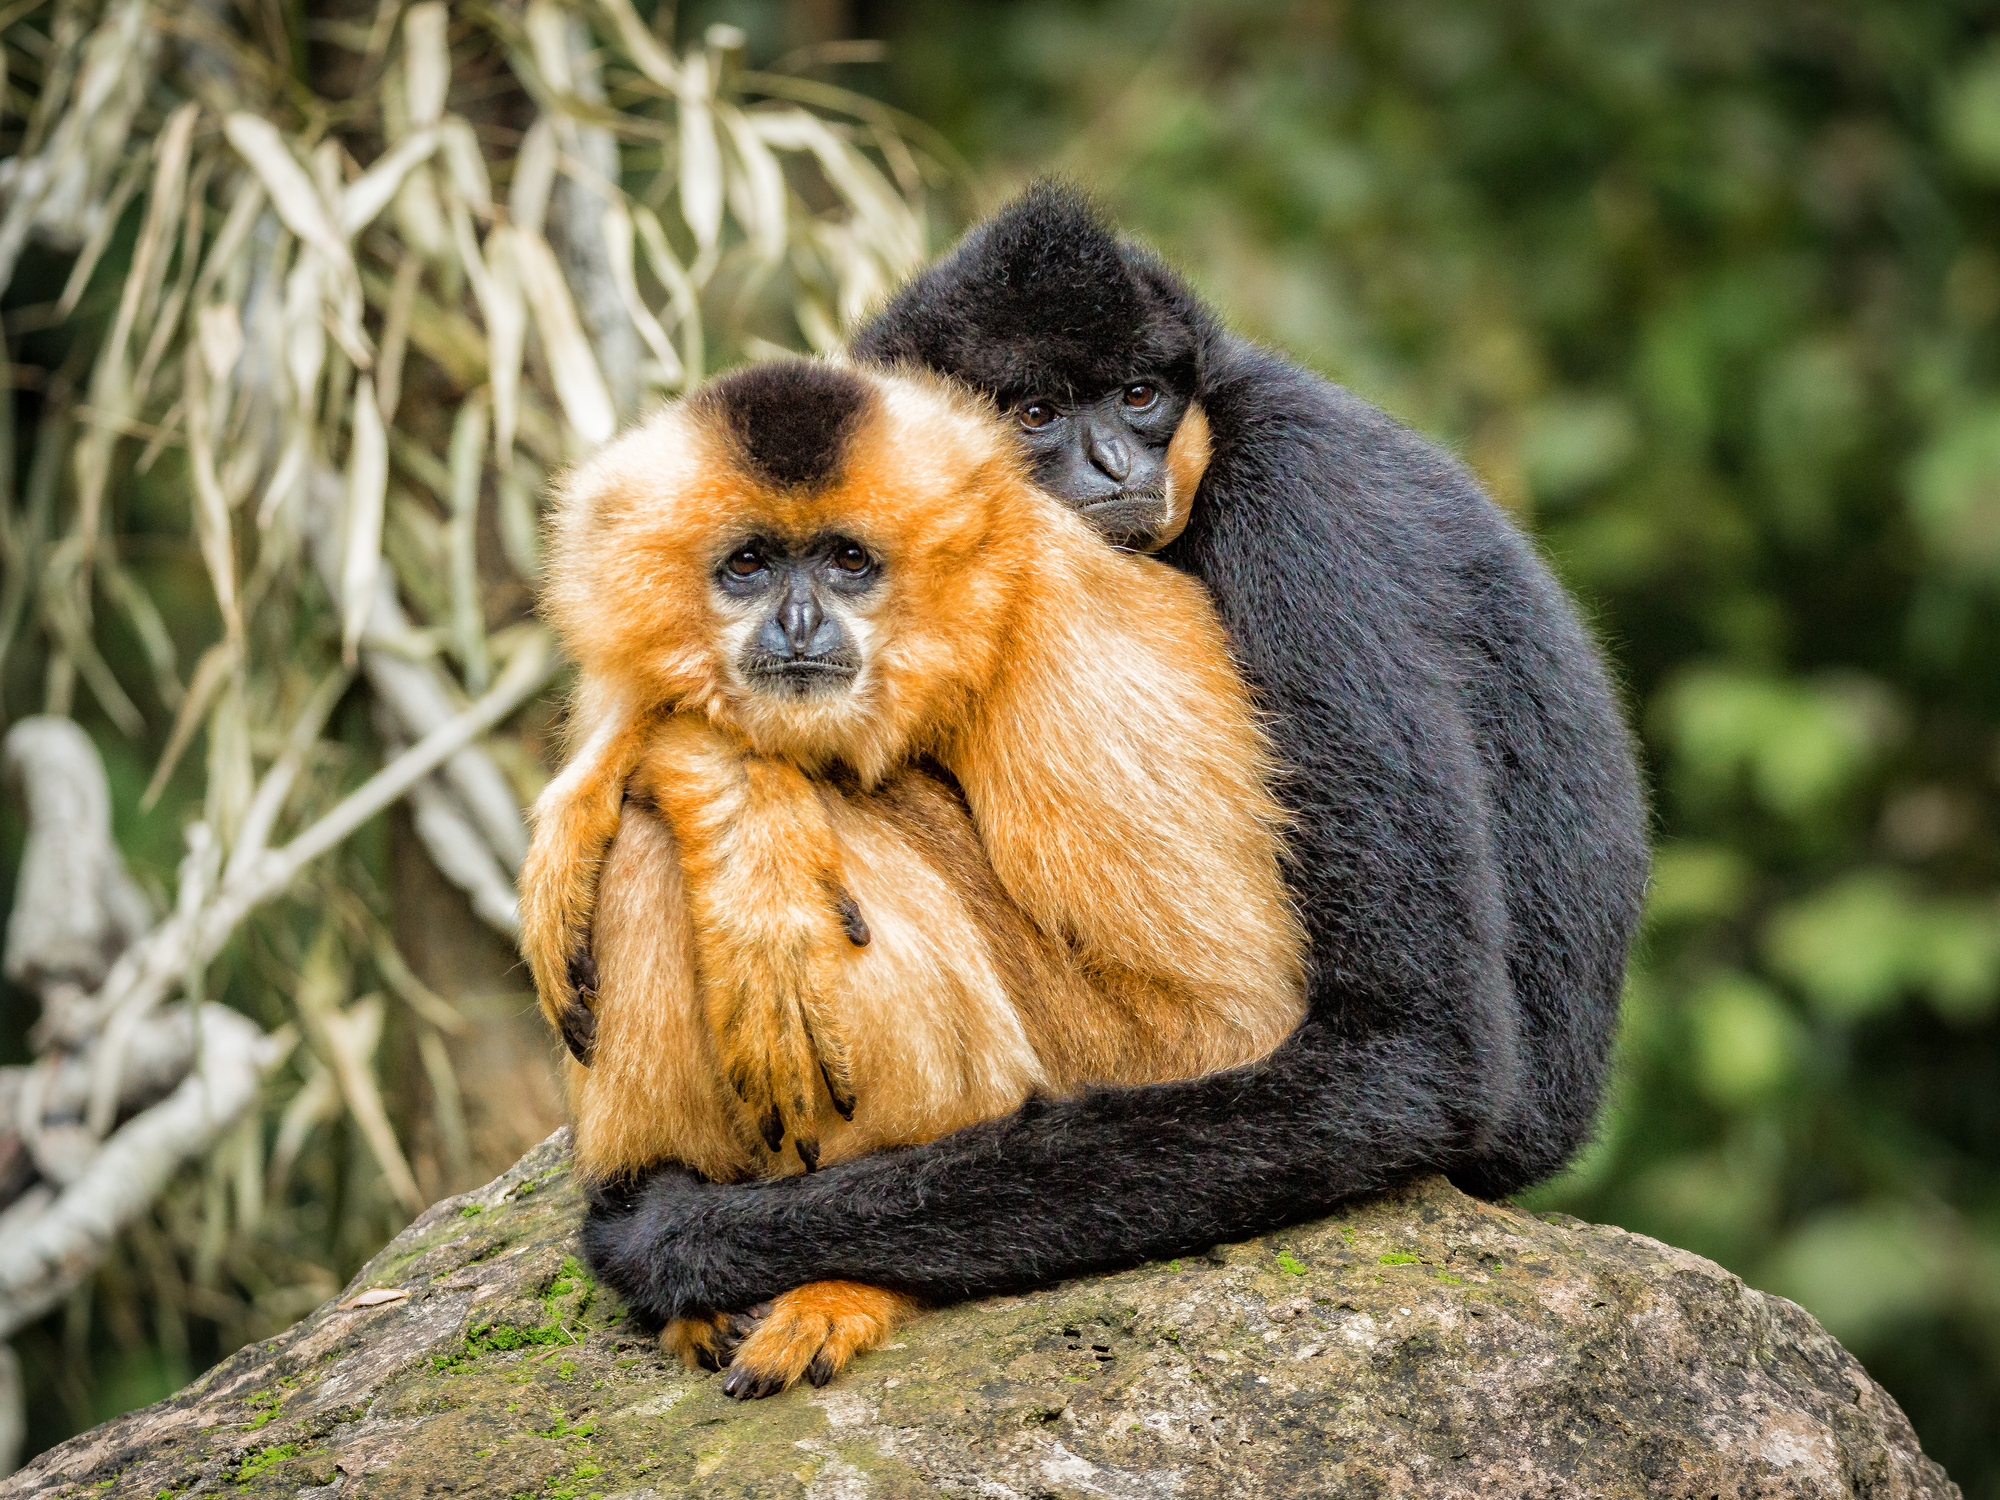 Gibbons, a type of ape, mate for life. (Rüdiger Katterwe / EyeEm/ Getty Images)